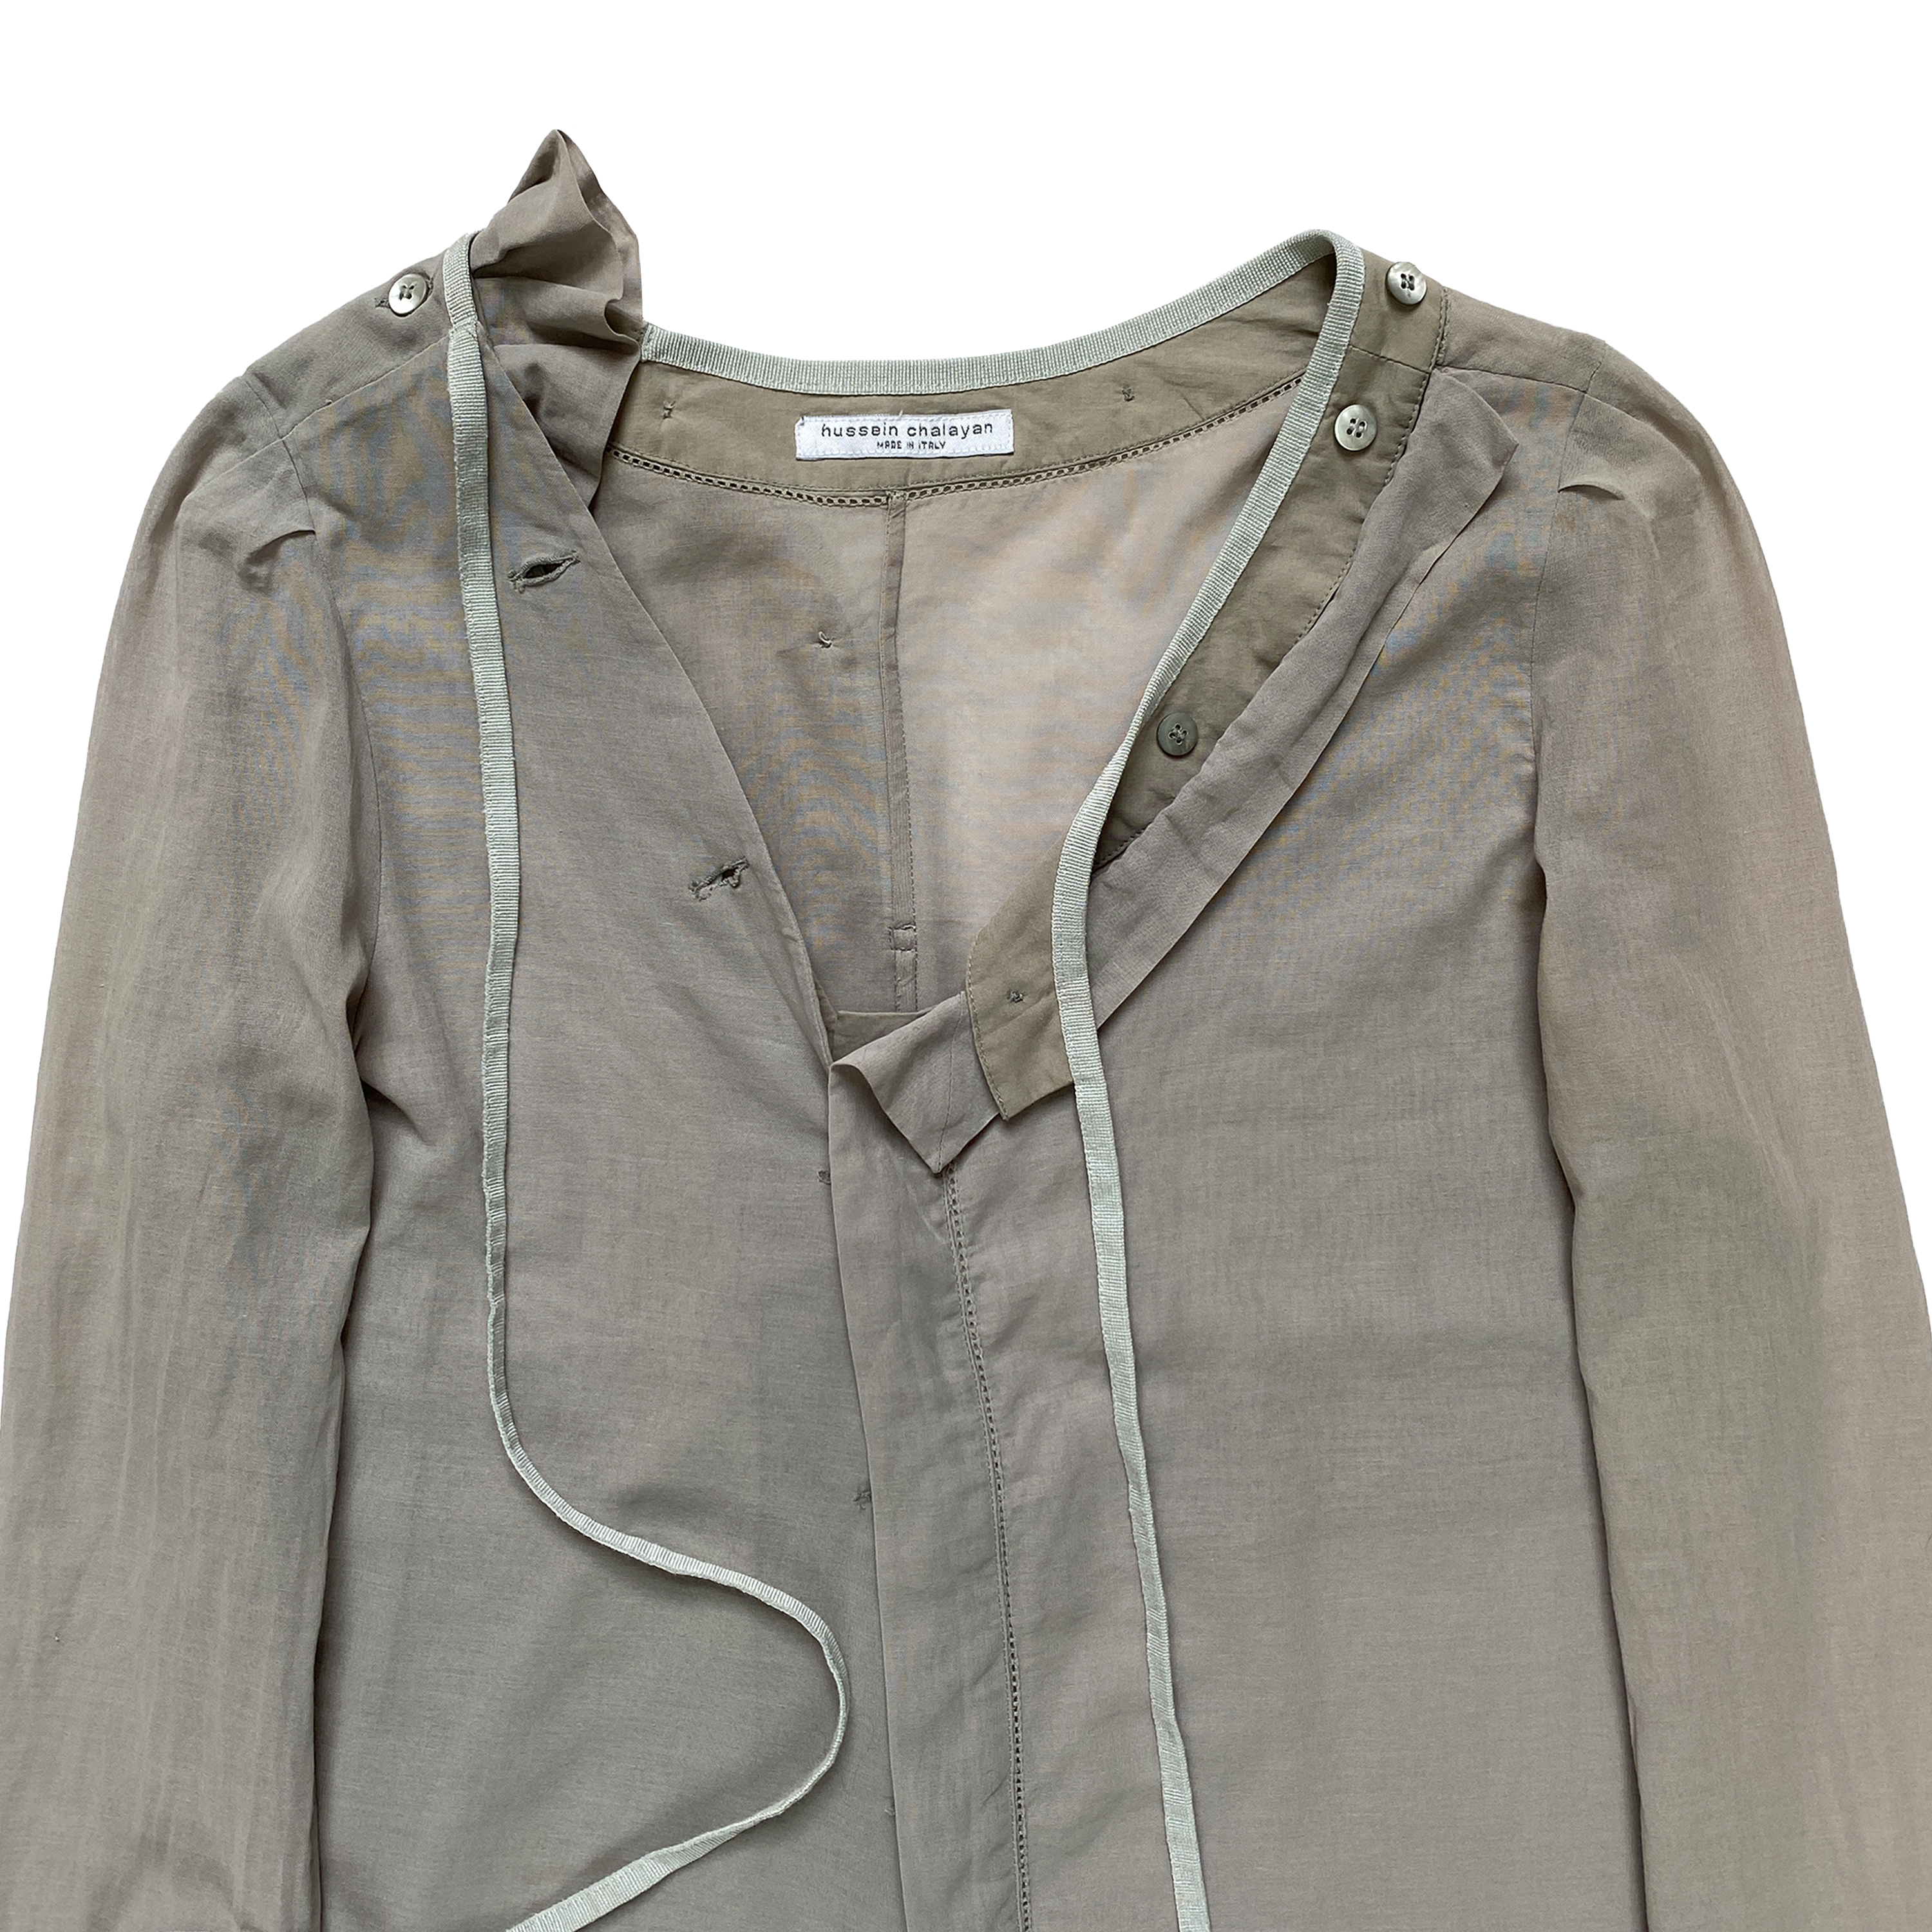 Hussein Chalayan, S/S 2002 Deconstructed Mesh String Shirt - La ...